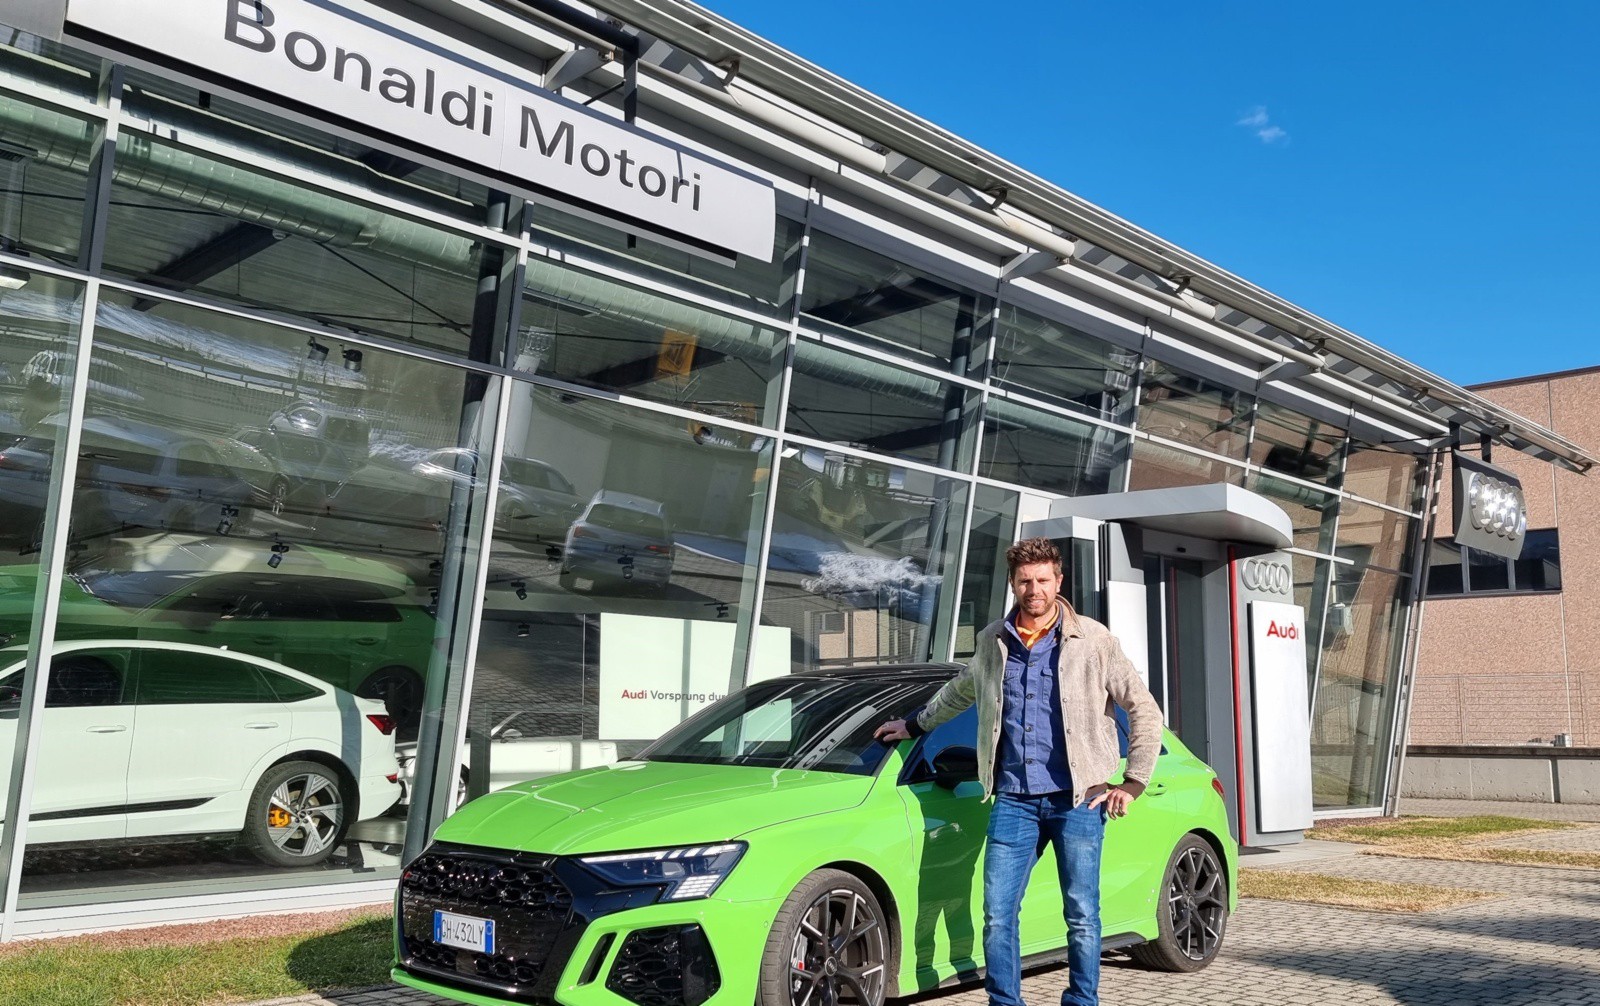 The Audi RS 3 Sportback is the first of its kind in Valsassina and Valtellina